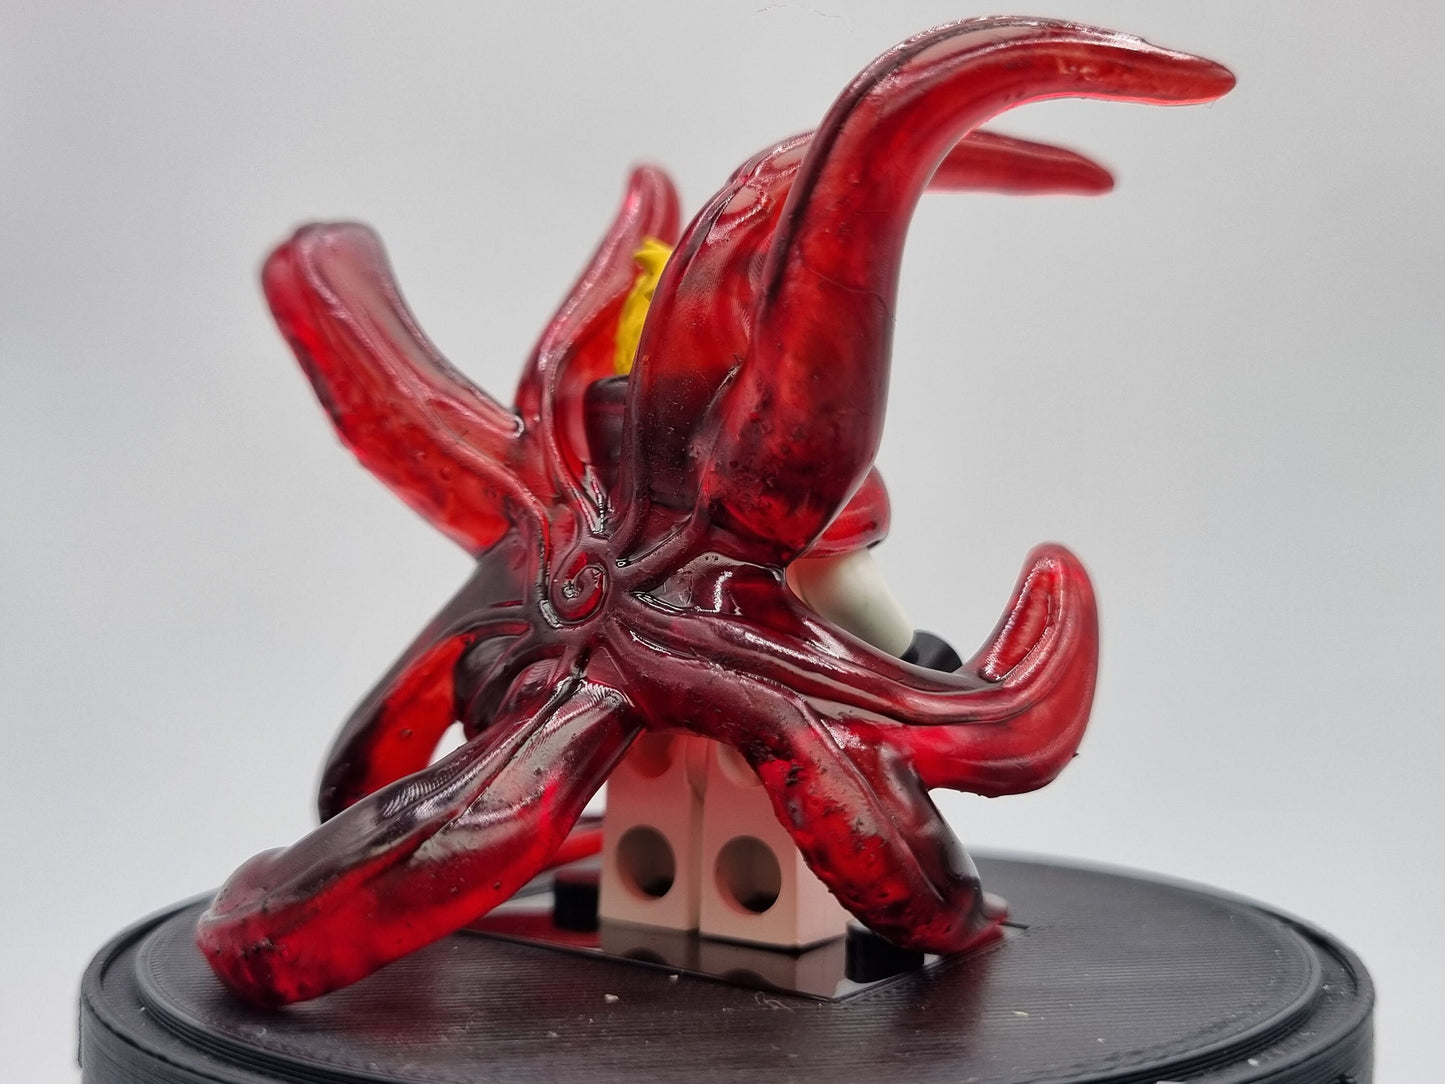 Building toy custom 3D printed and fully painted transparent tentical mode!